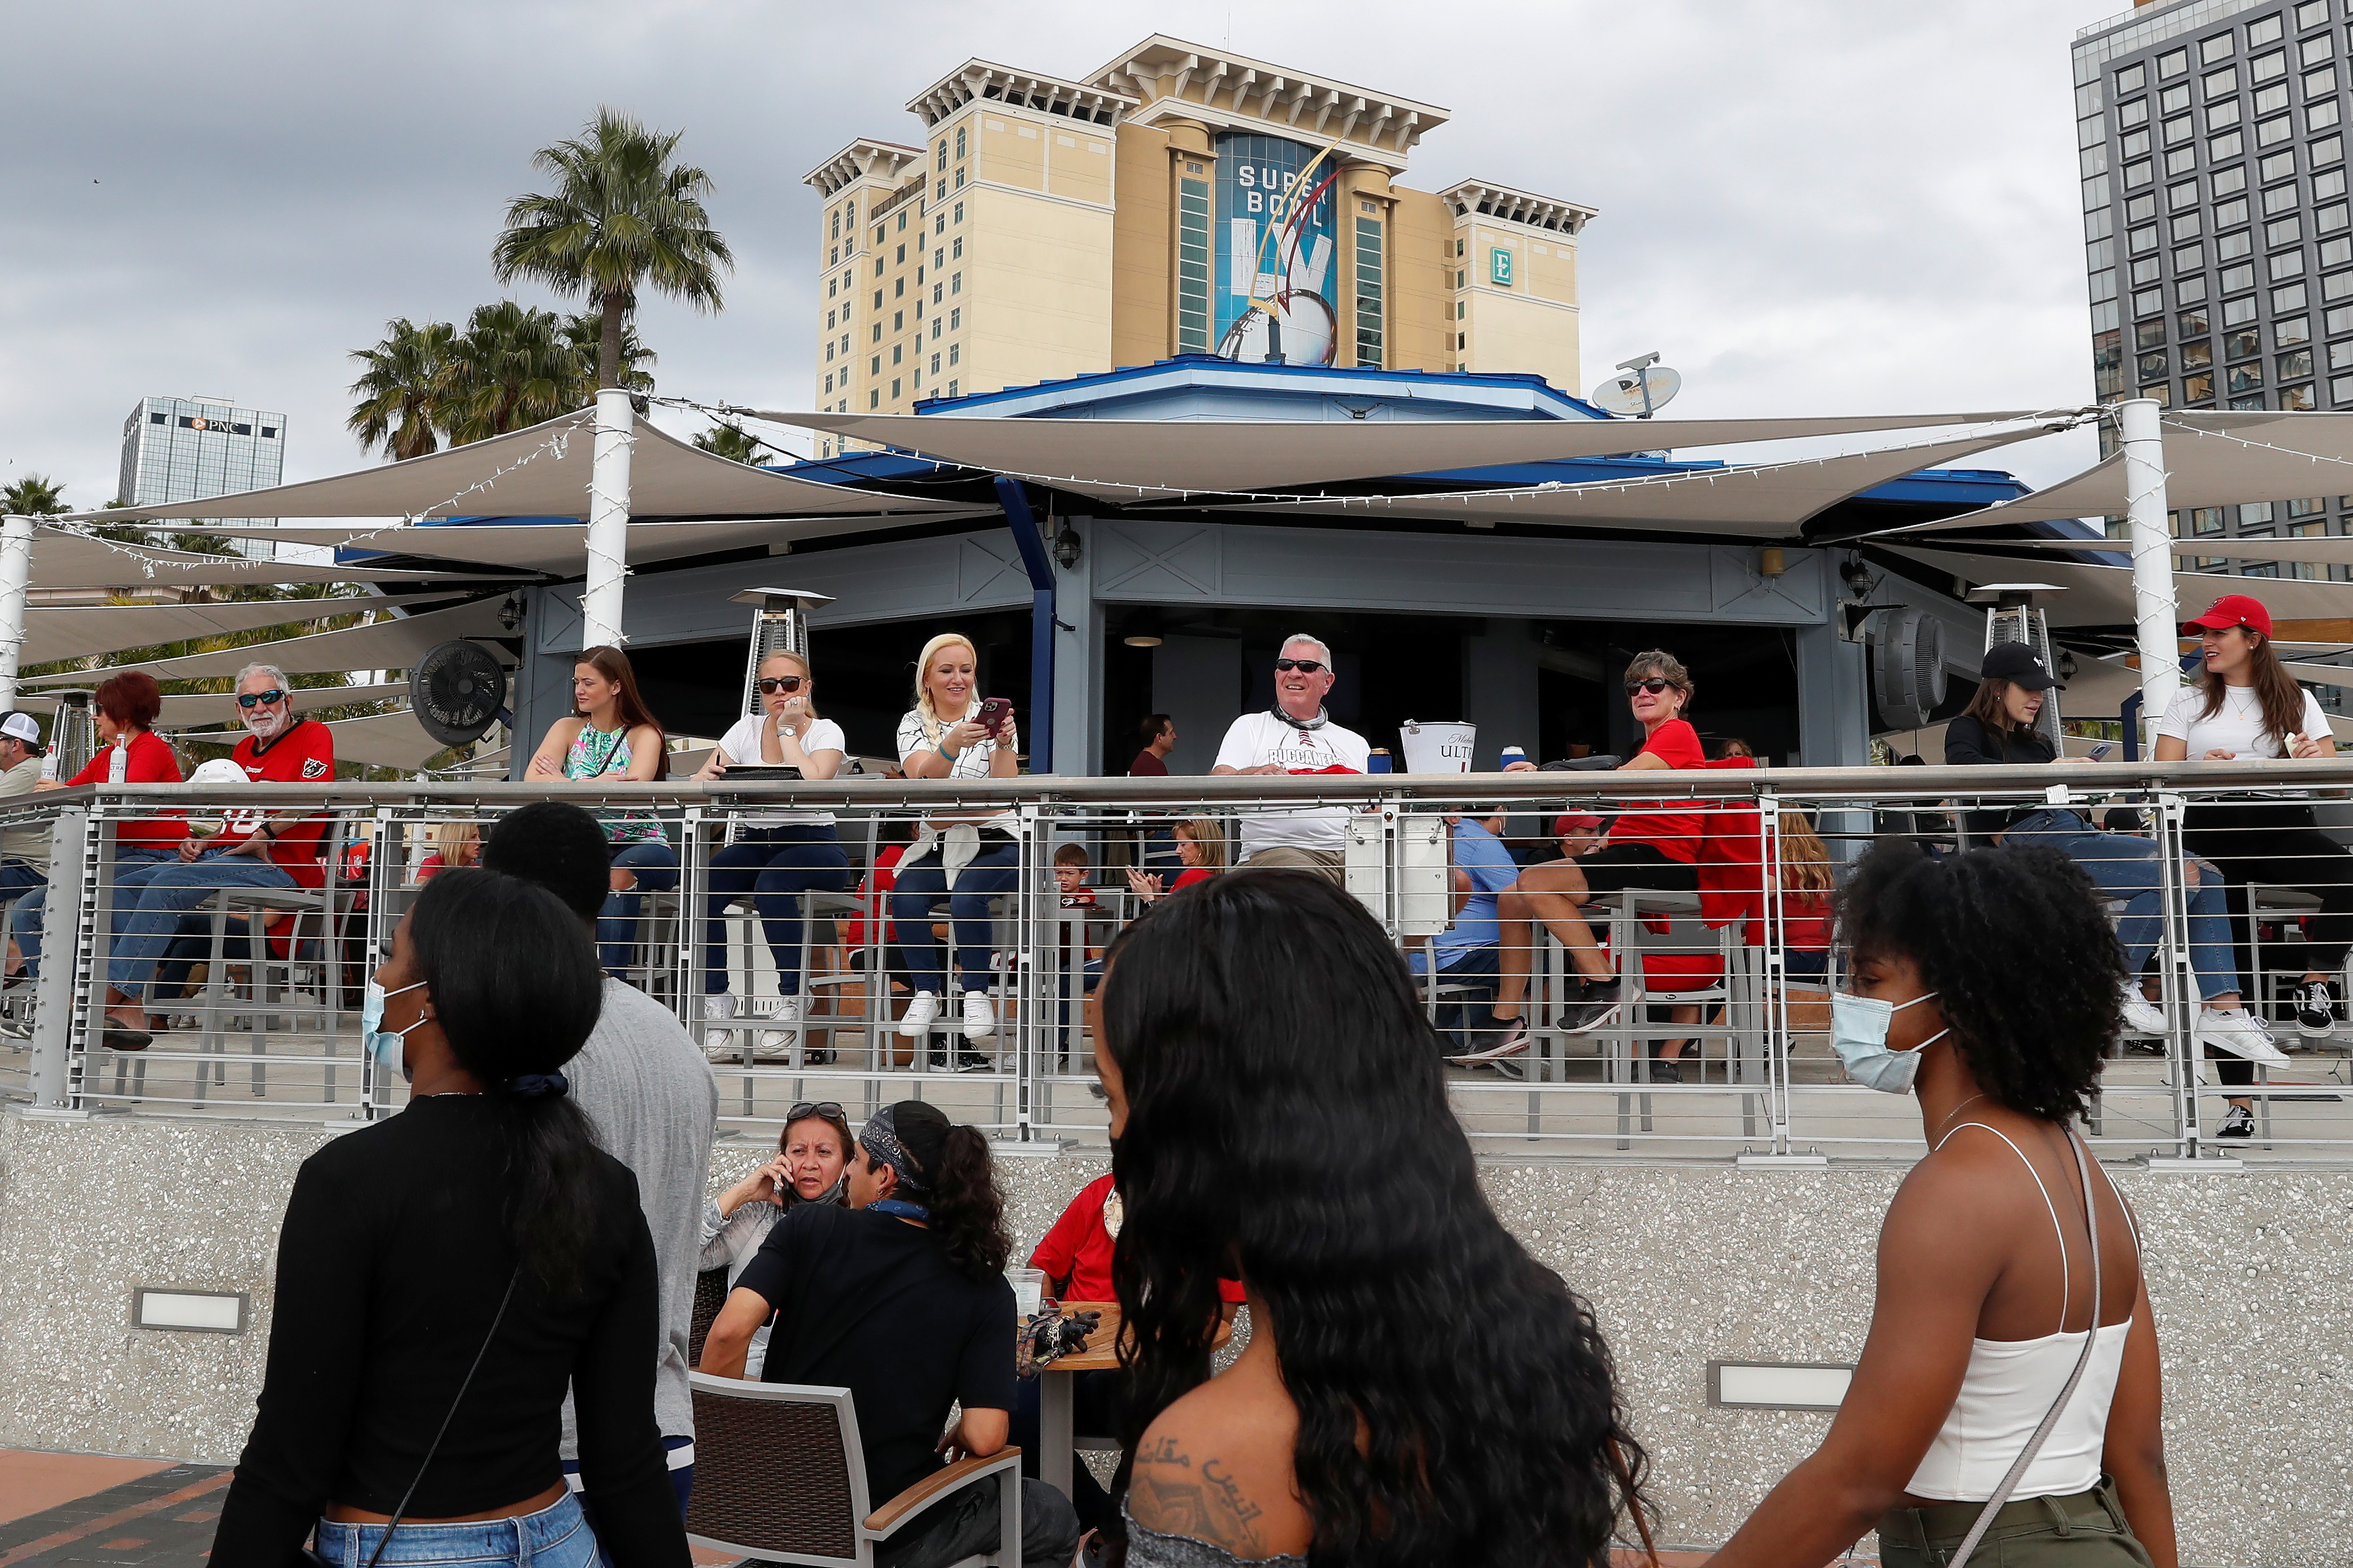 People sit at an outdoor terrace outside the Tampa Convention Center a day before the Super Bowl LV between the Kansas City Chiefs and Tampa Bay Buccaneers, as the spread of the coronavirus disease (COVID-19) continues in Tampa, Florida, February 6, 2021. REUTERS/Shannon Stapleton